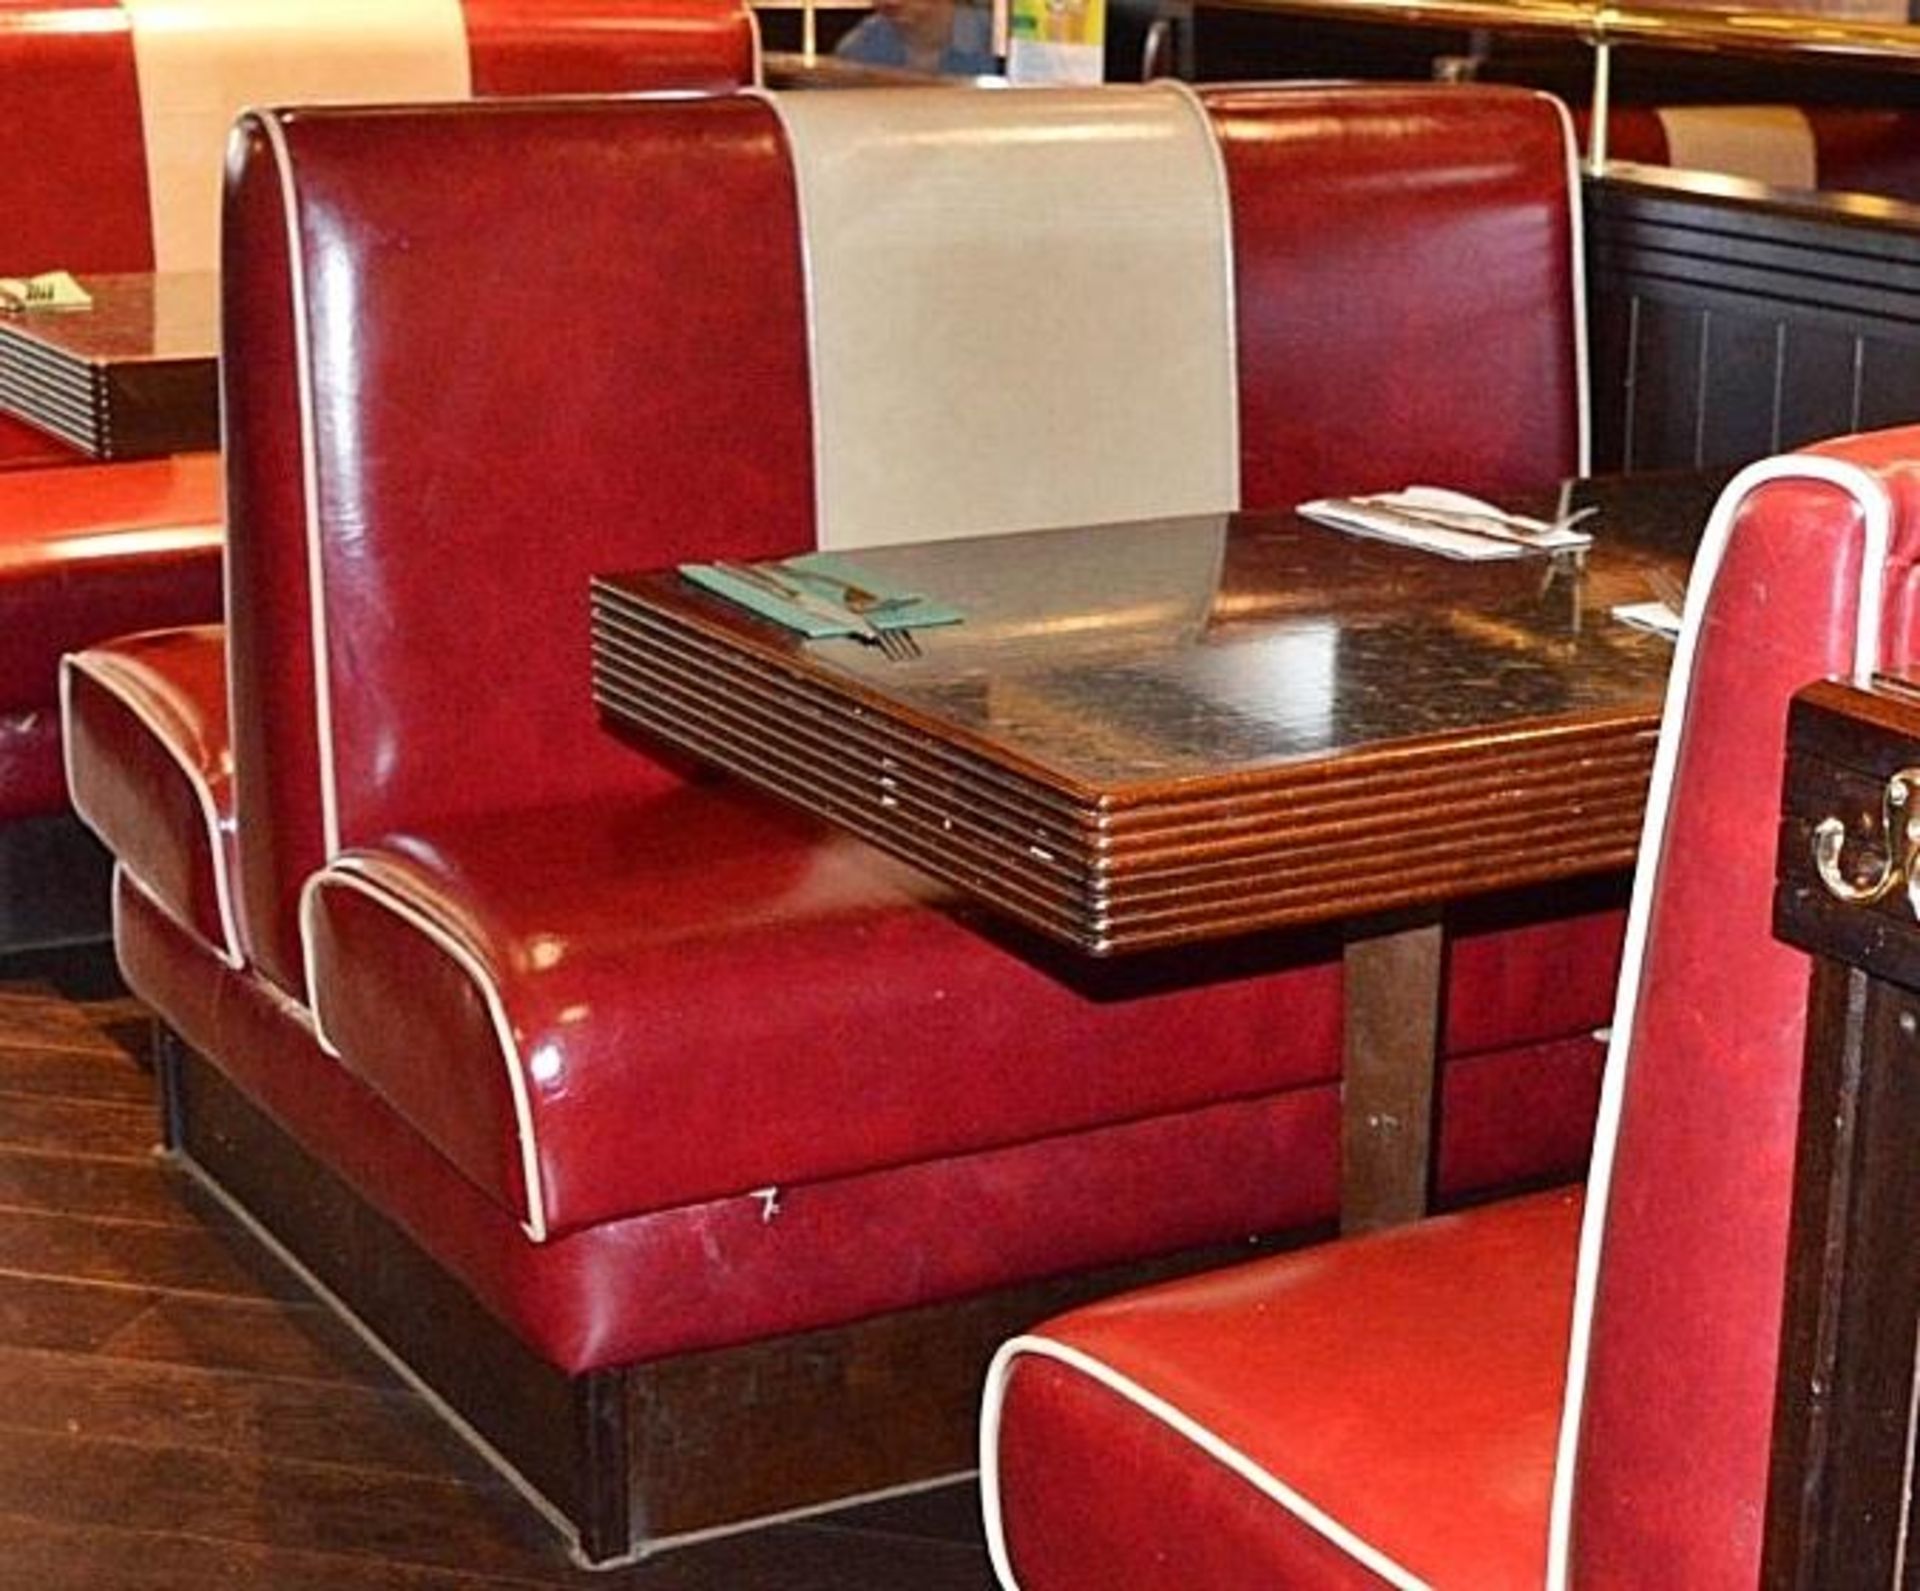 1 x Contemporary Double-Sided Booth Seating Upholstered In A Bright Red Faux Leather - H100 x W120 x